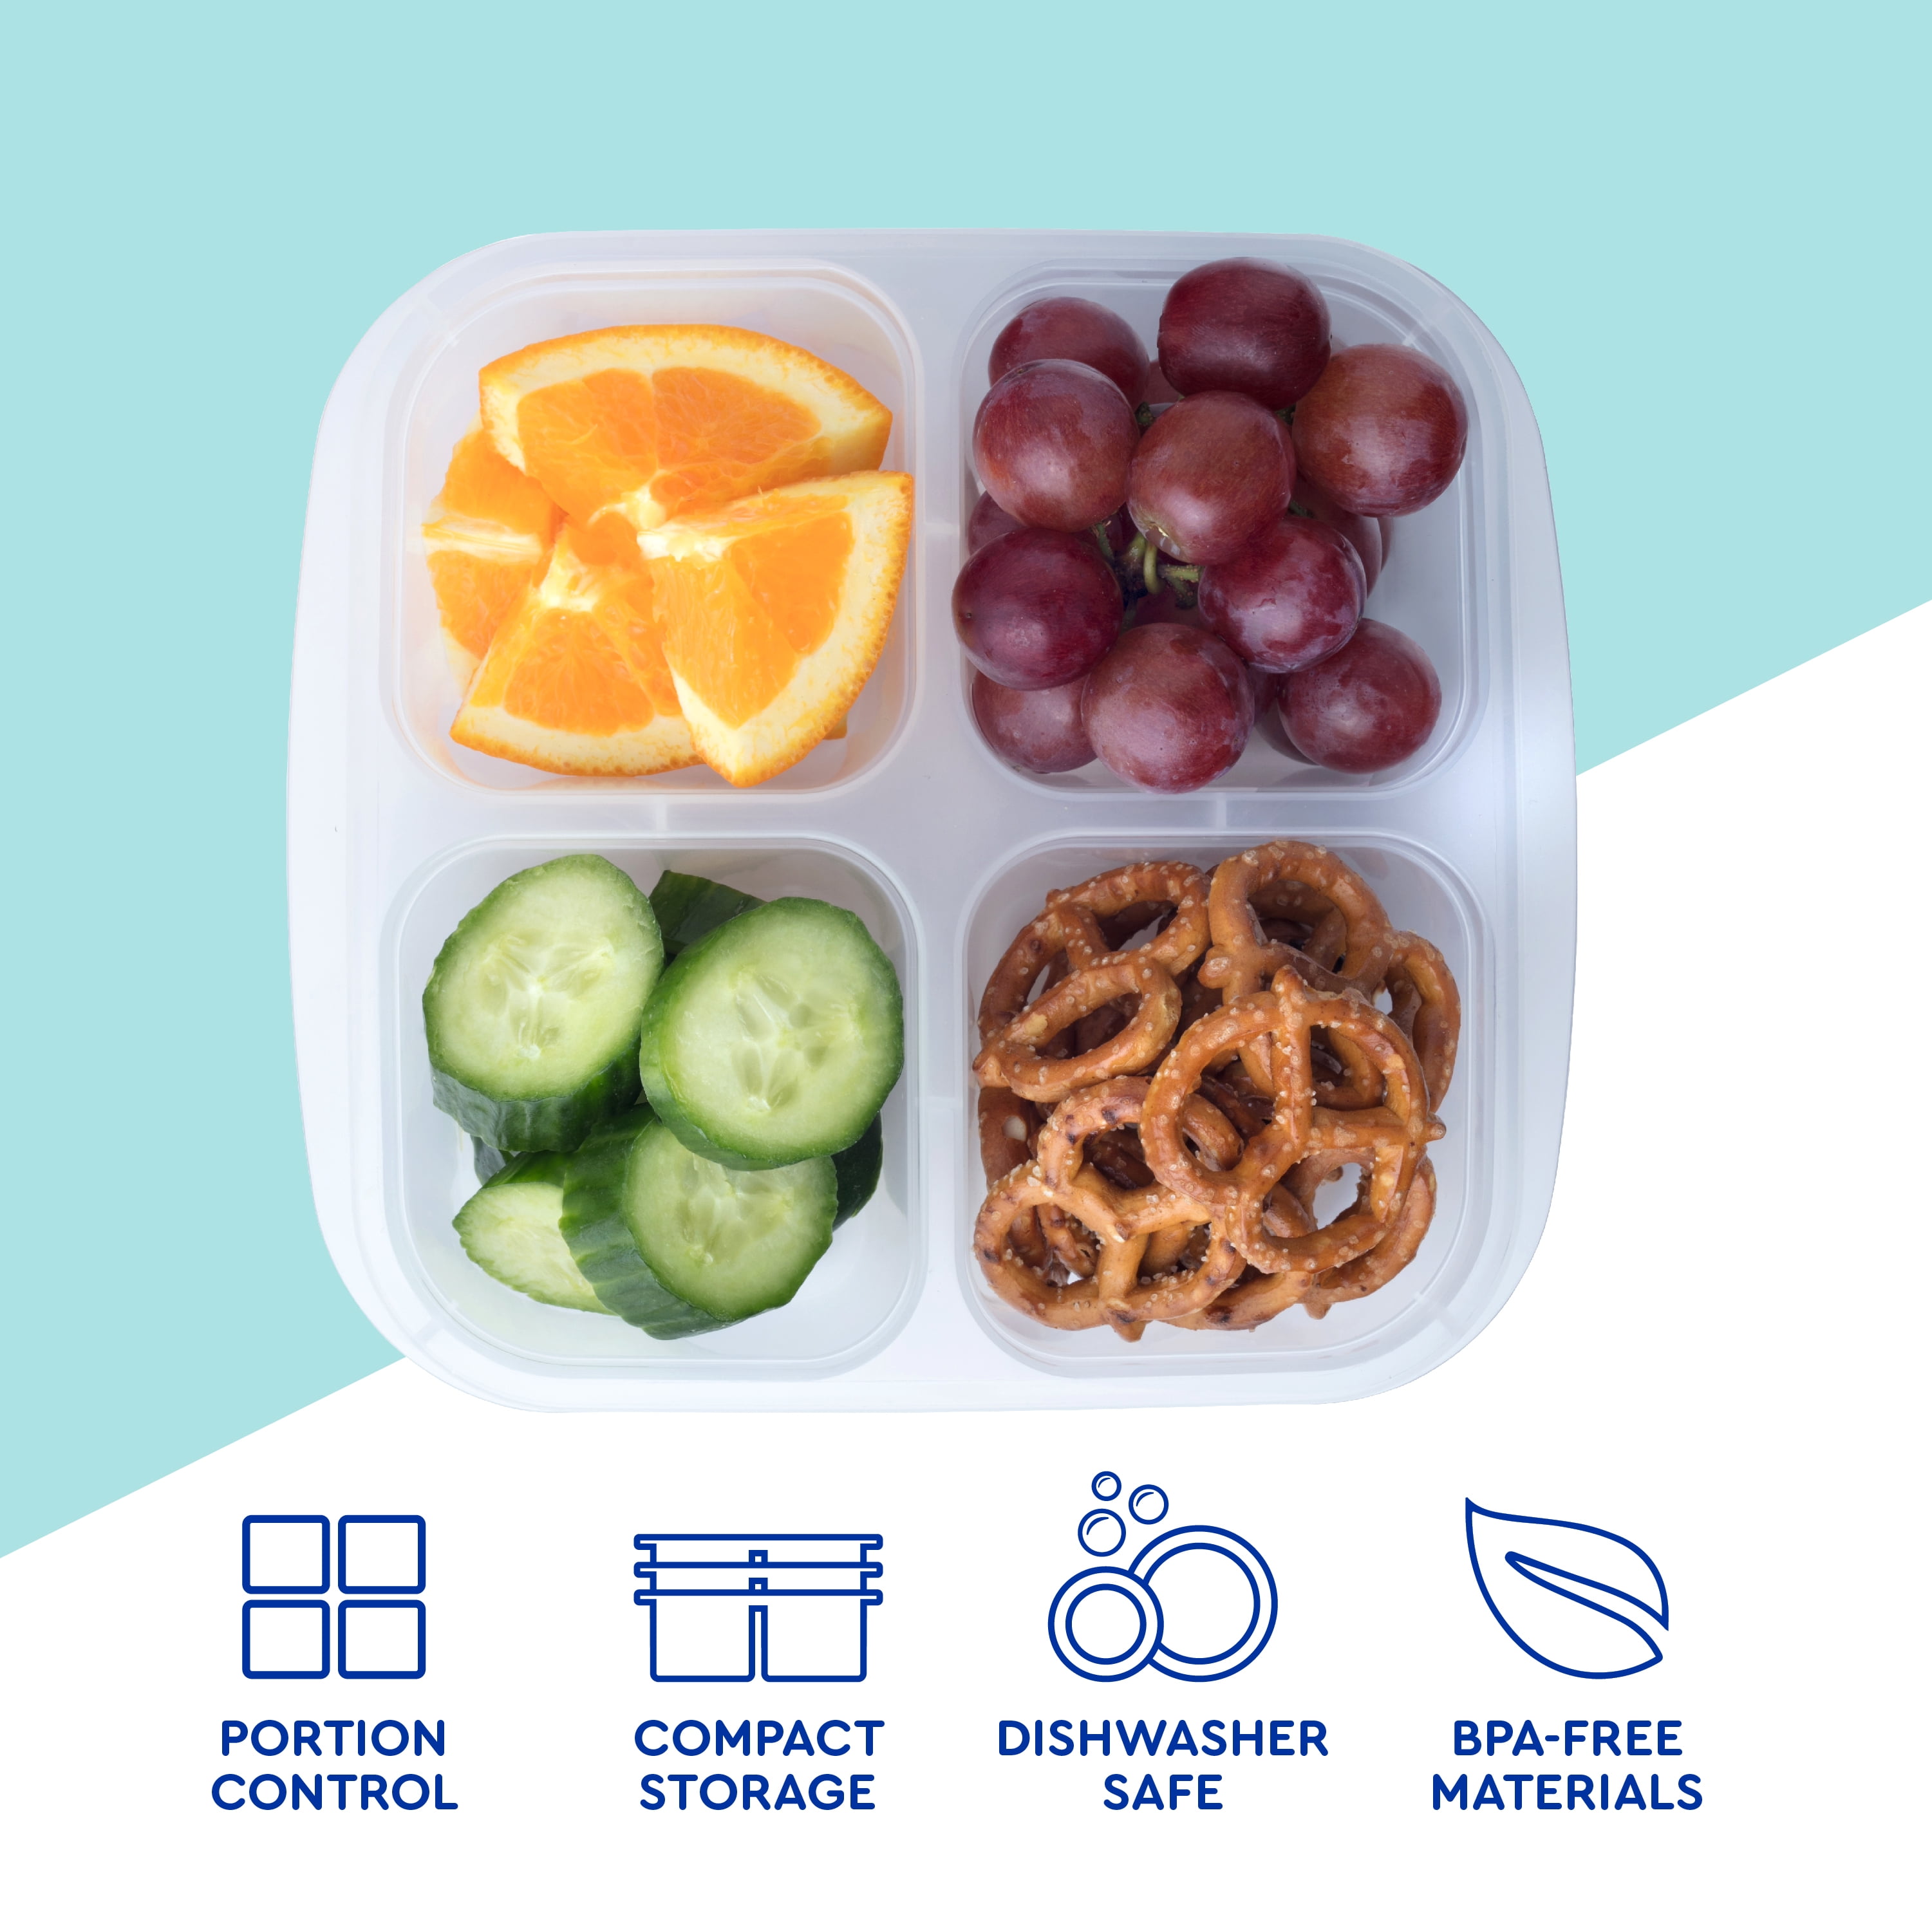 Nuoqiuu 4 Pack Snack Containers, 4 Compartment Lunchable Containers,  Reusable Meal Prep Snack Contai…See more Nuoqiuu 4 Pack Snack Containers, 4